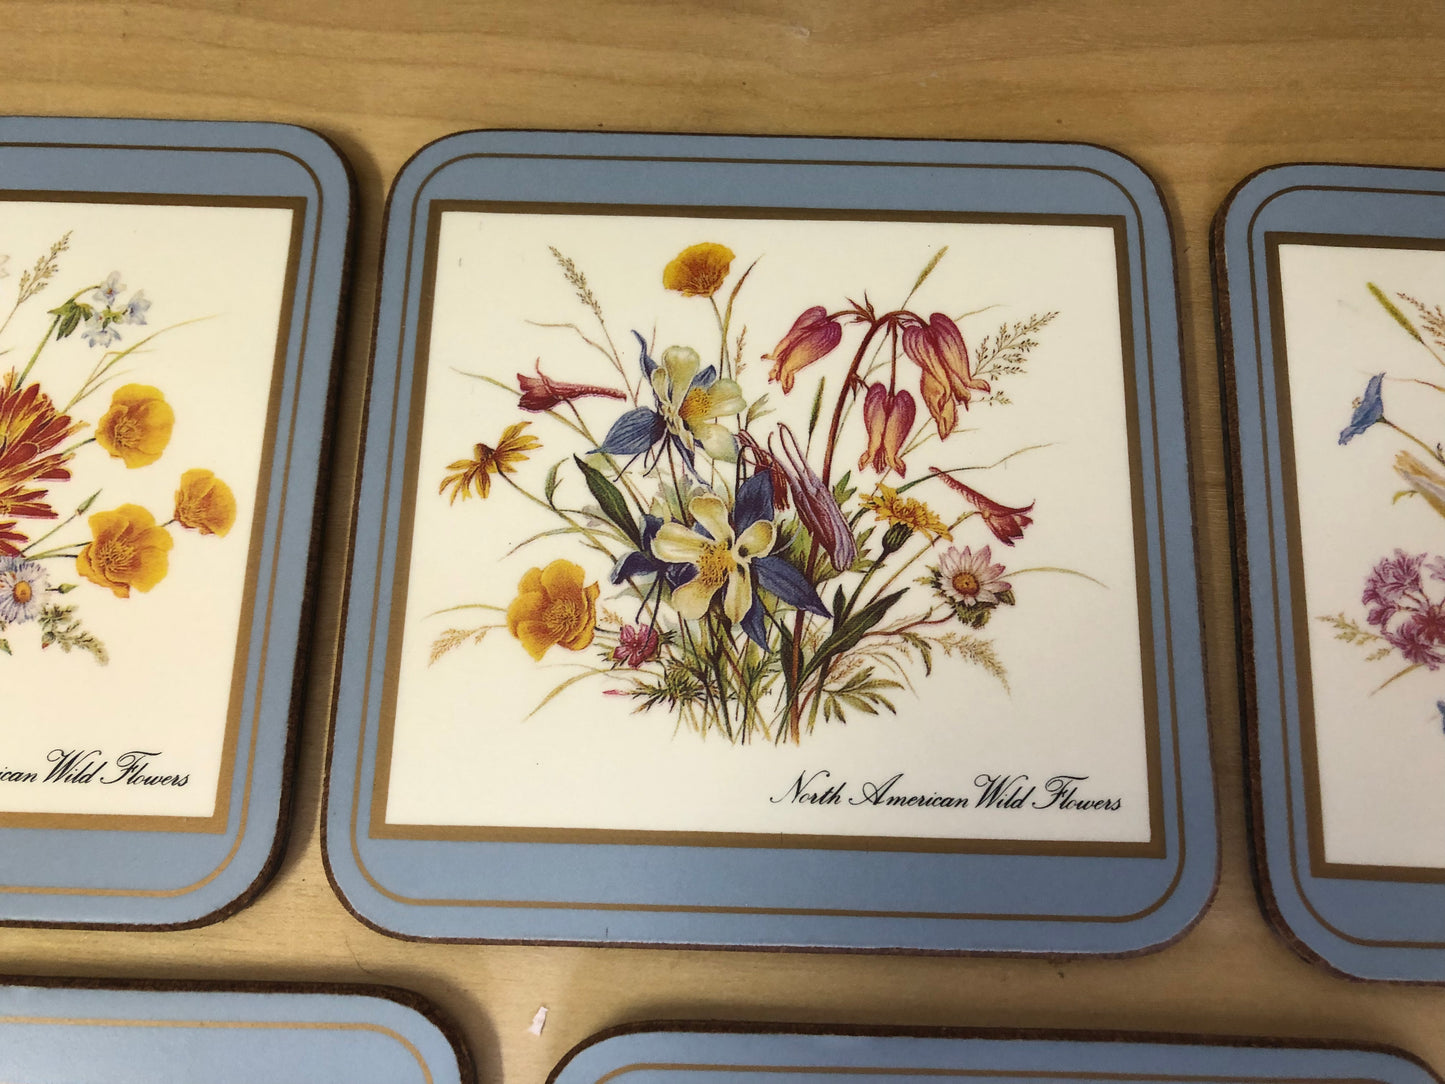 Vintage Pimpernel wildflowers coasters (set of 6) - Excellent condition!